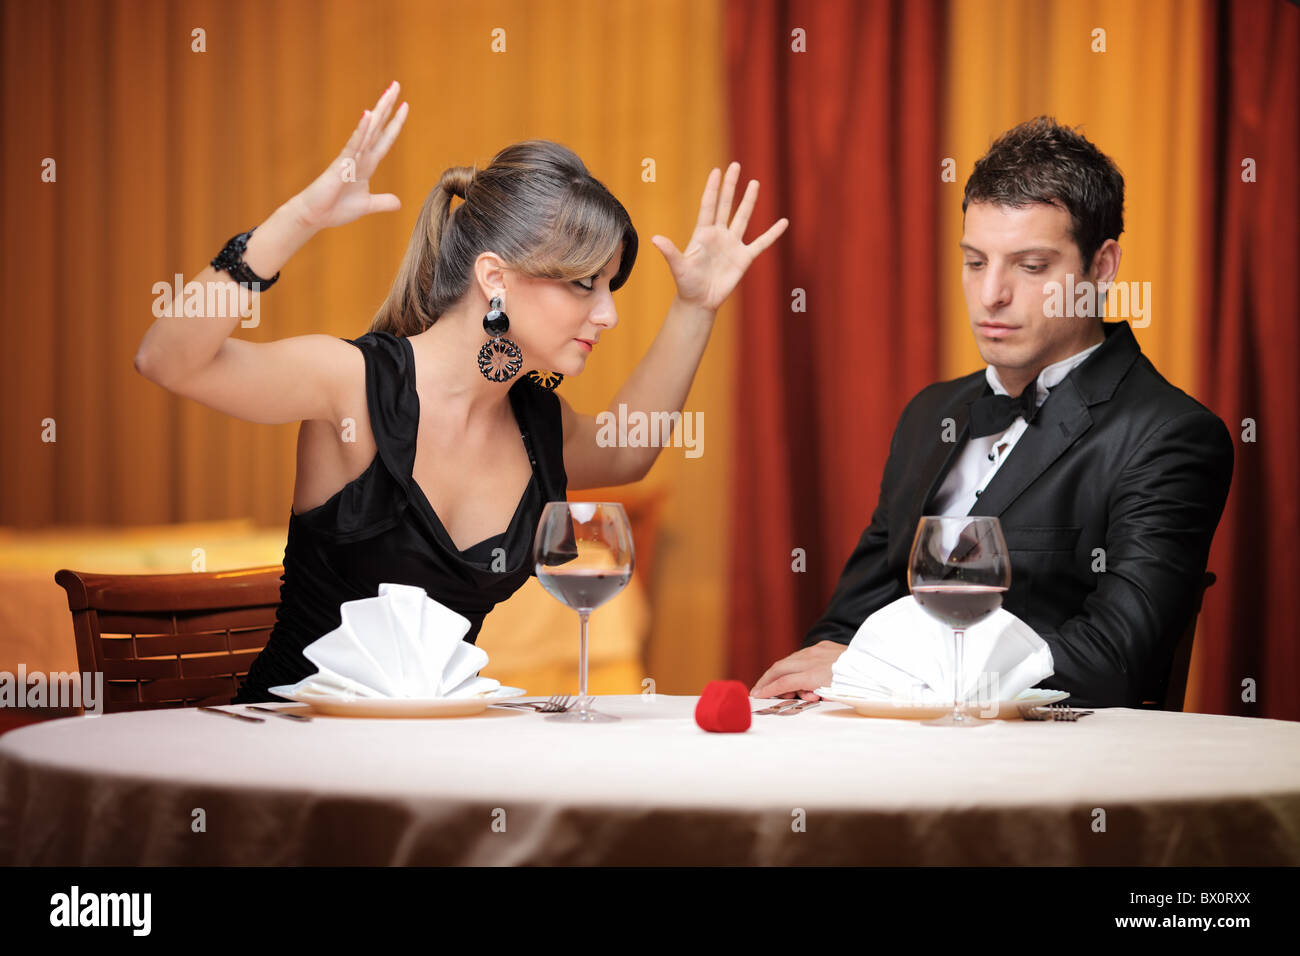 Young couple having an argument in a restaurant Stock Photo